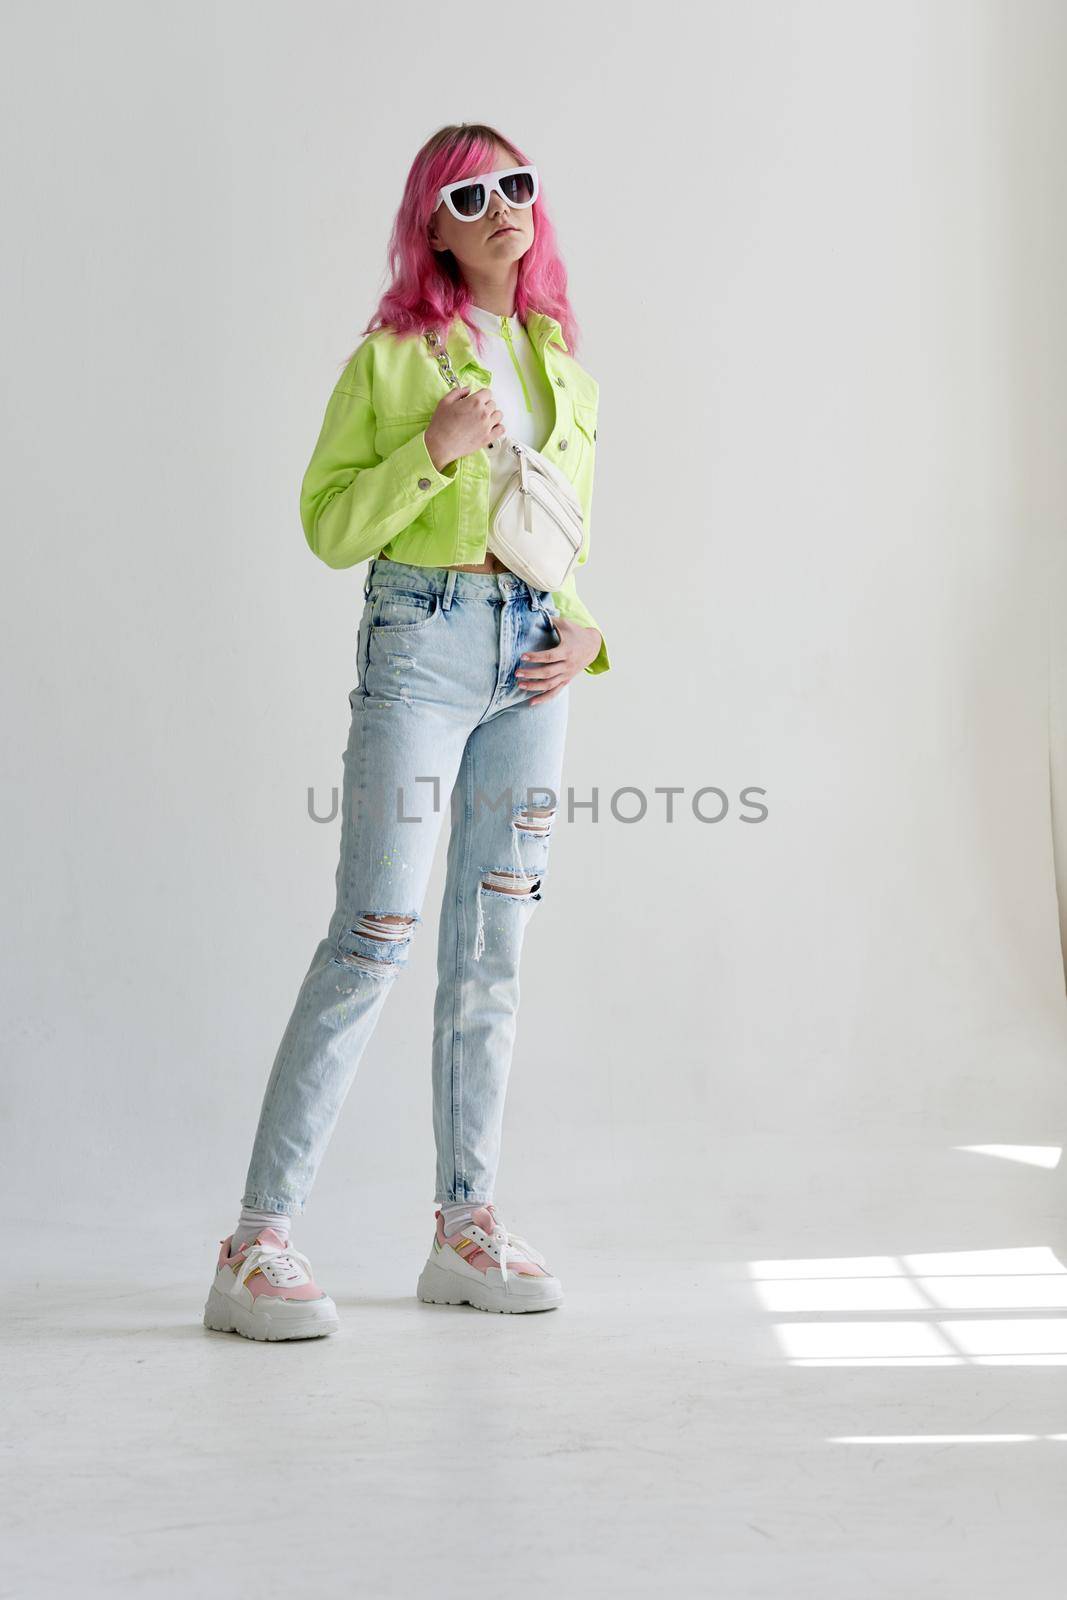 hipster woman with pink hair creative Acid style design by Vichizh